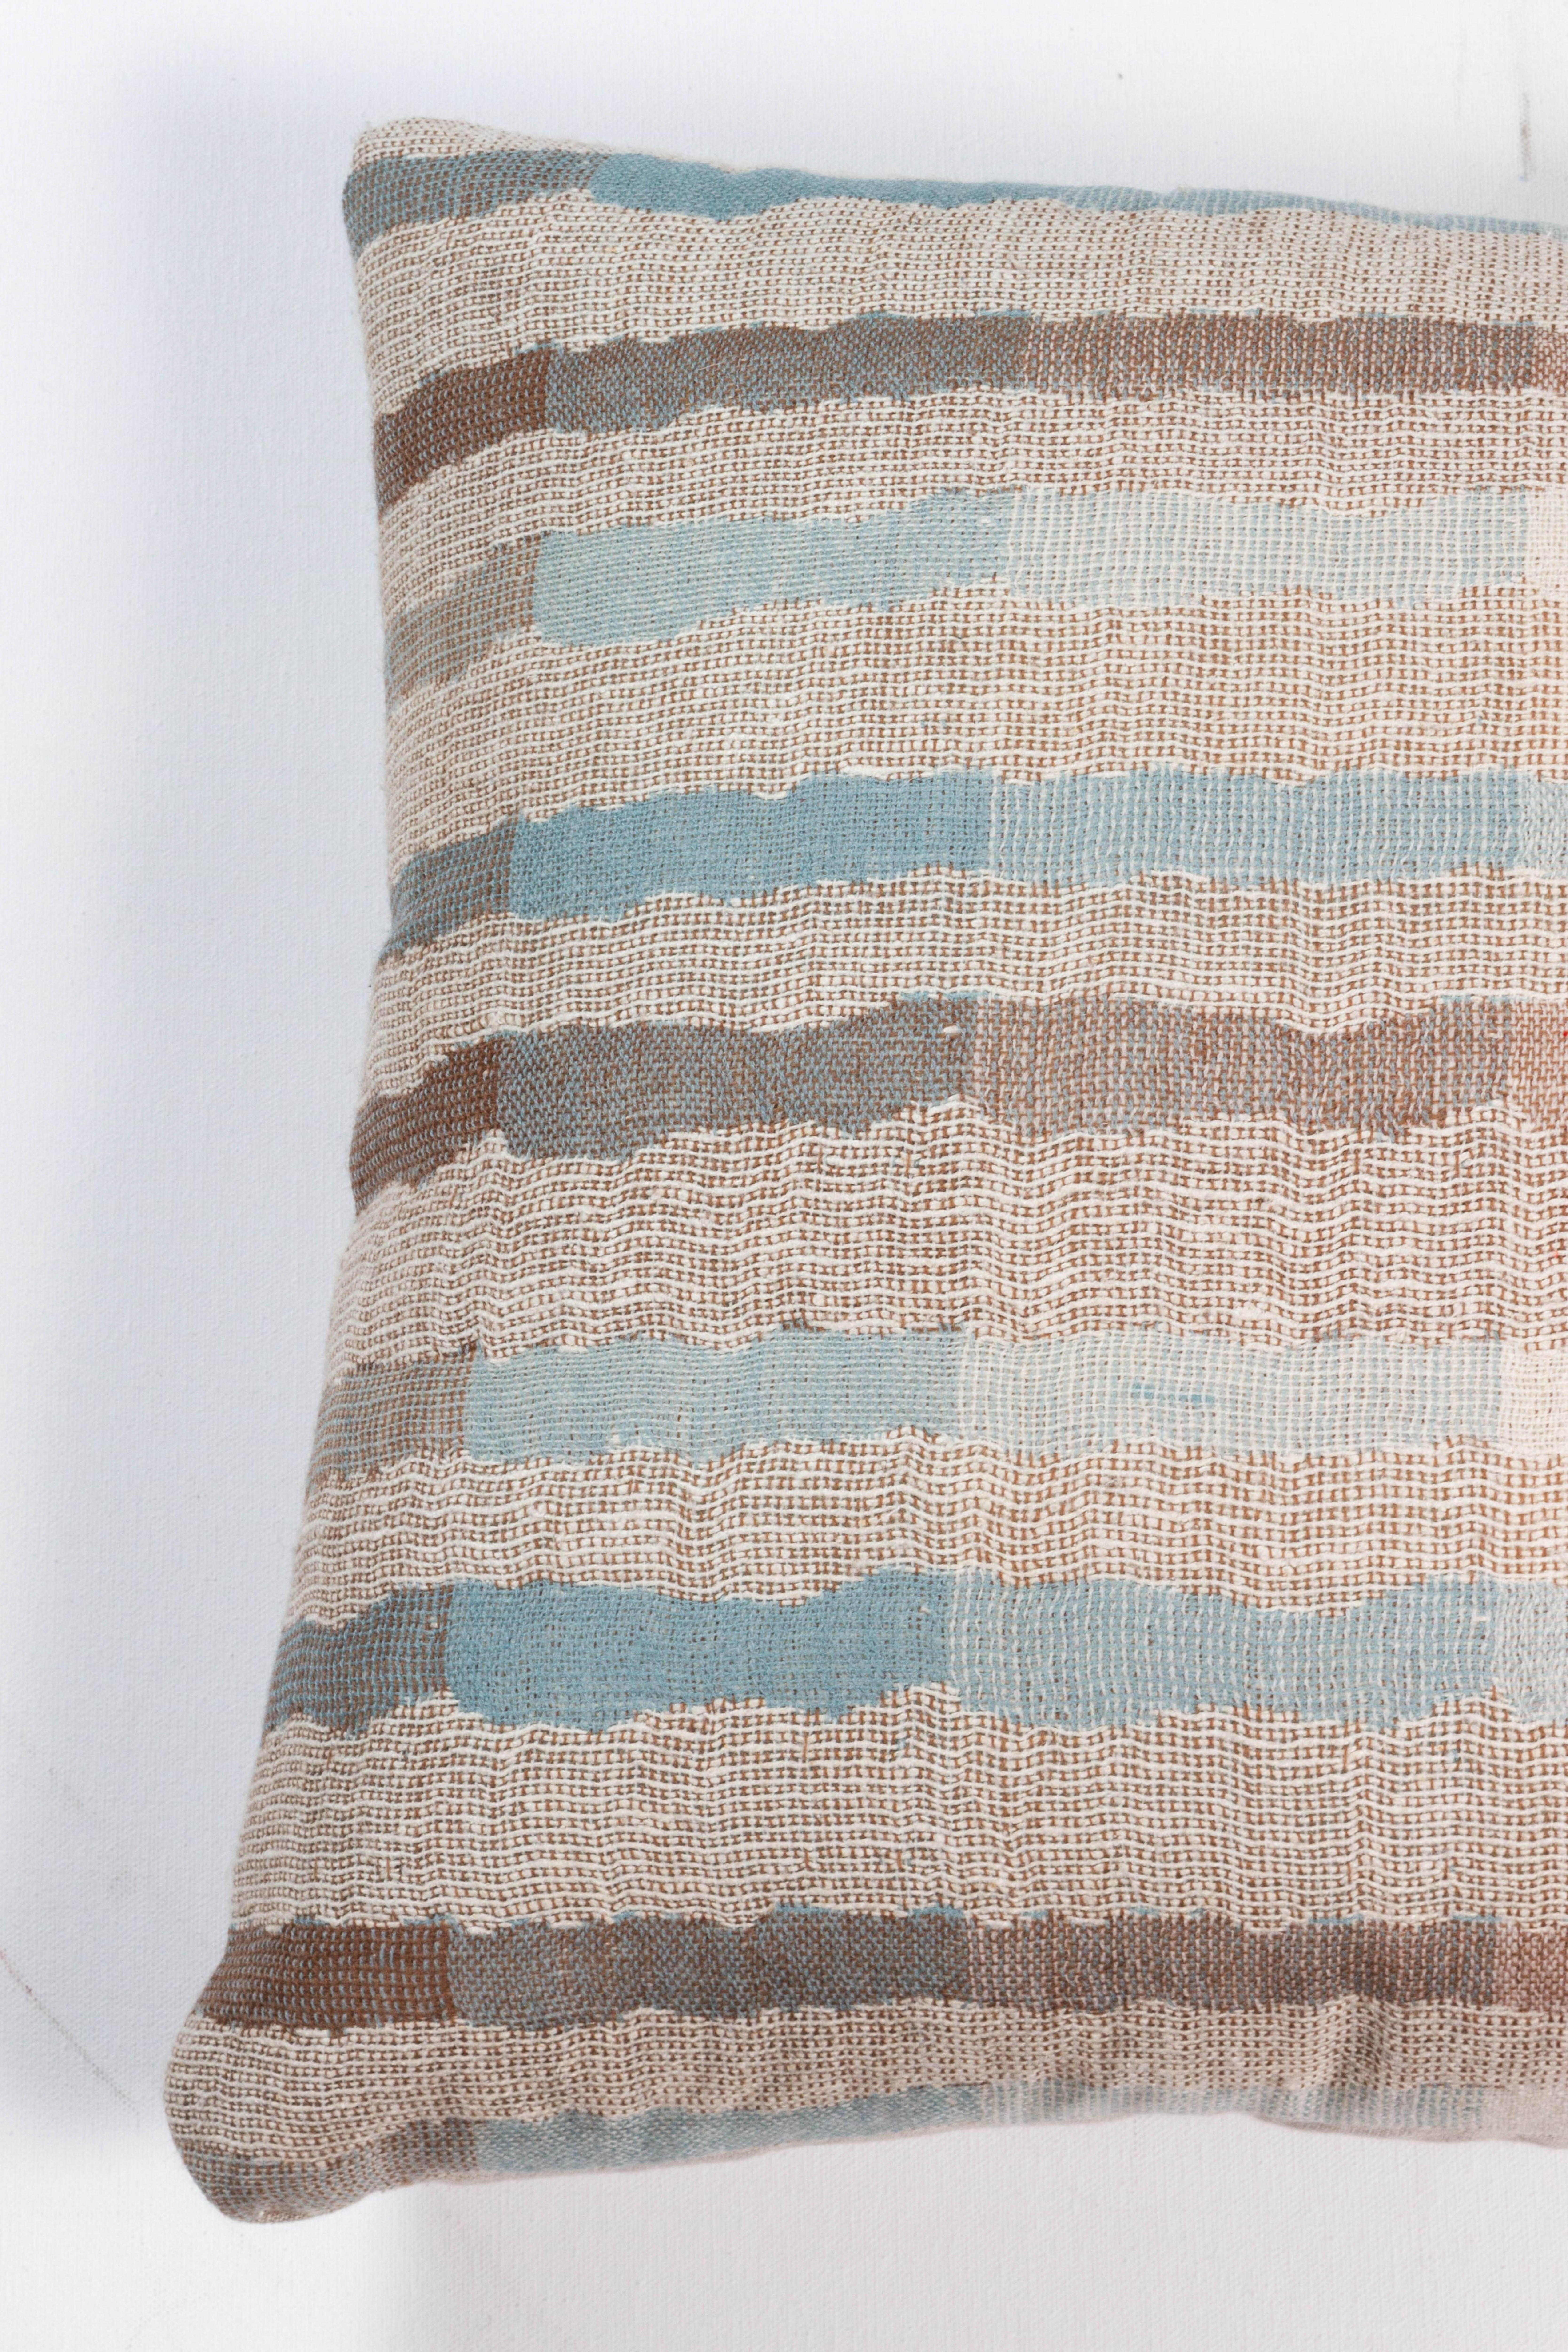 A contemporary line of cushions, pillows, throws, bedcovers, bedspreads and yardage hand woven in India on antique jacquard looms. Handspun wool, cotton, linen, and raw silk give the textiles an appealing uneven quality.

This wool and raw Tussar